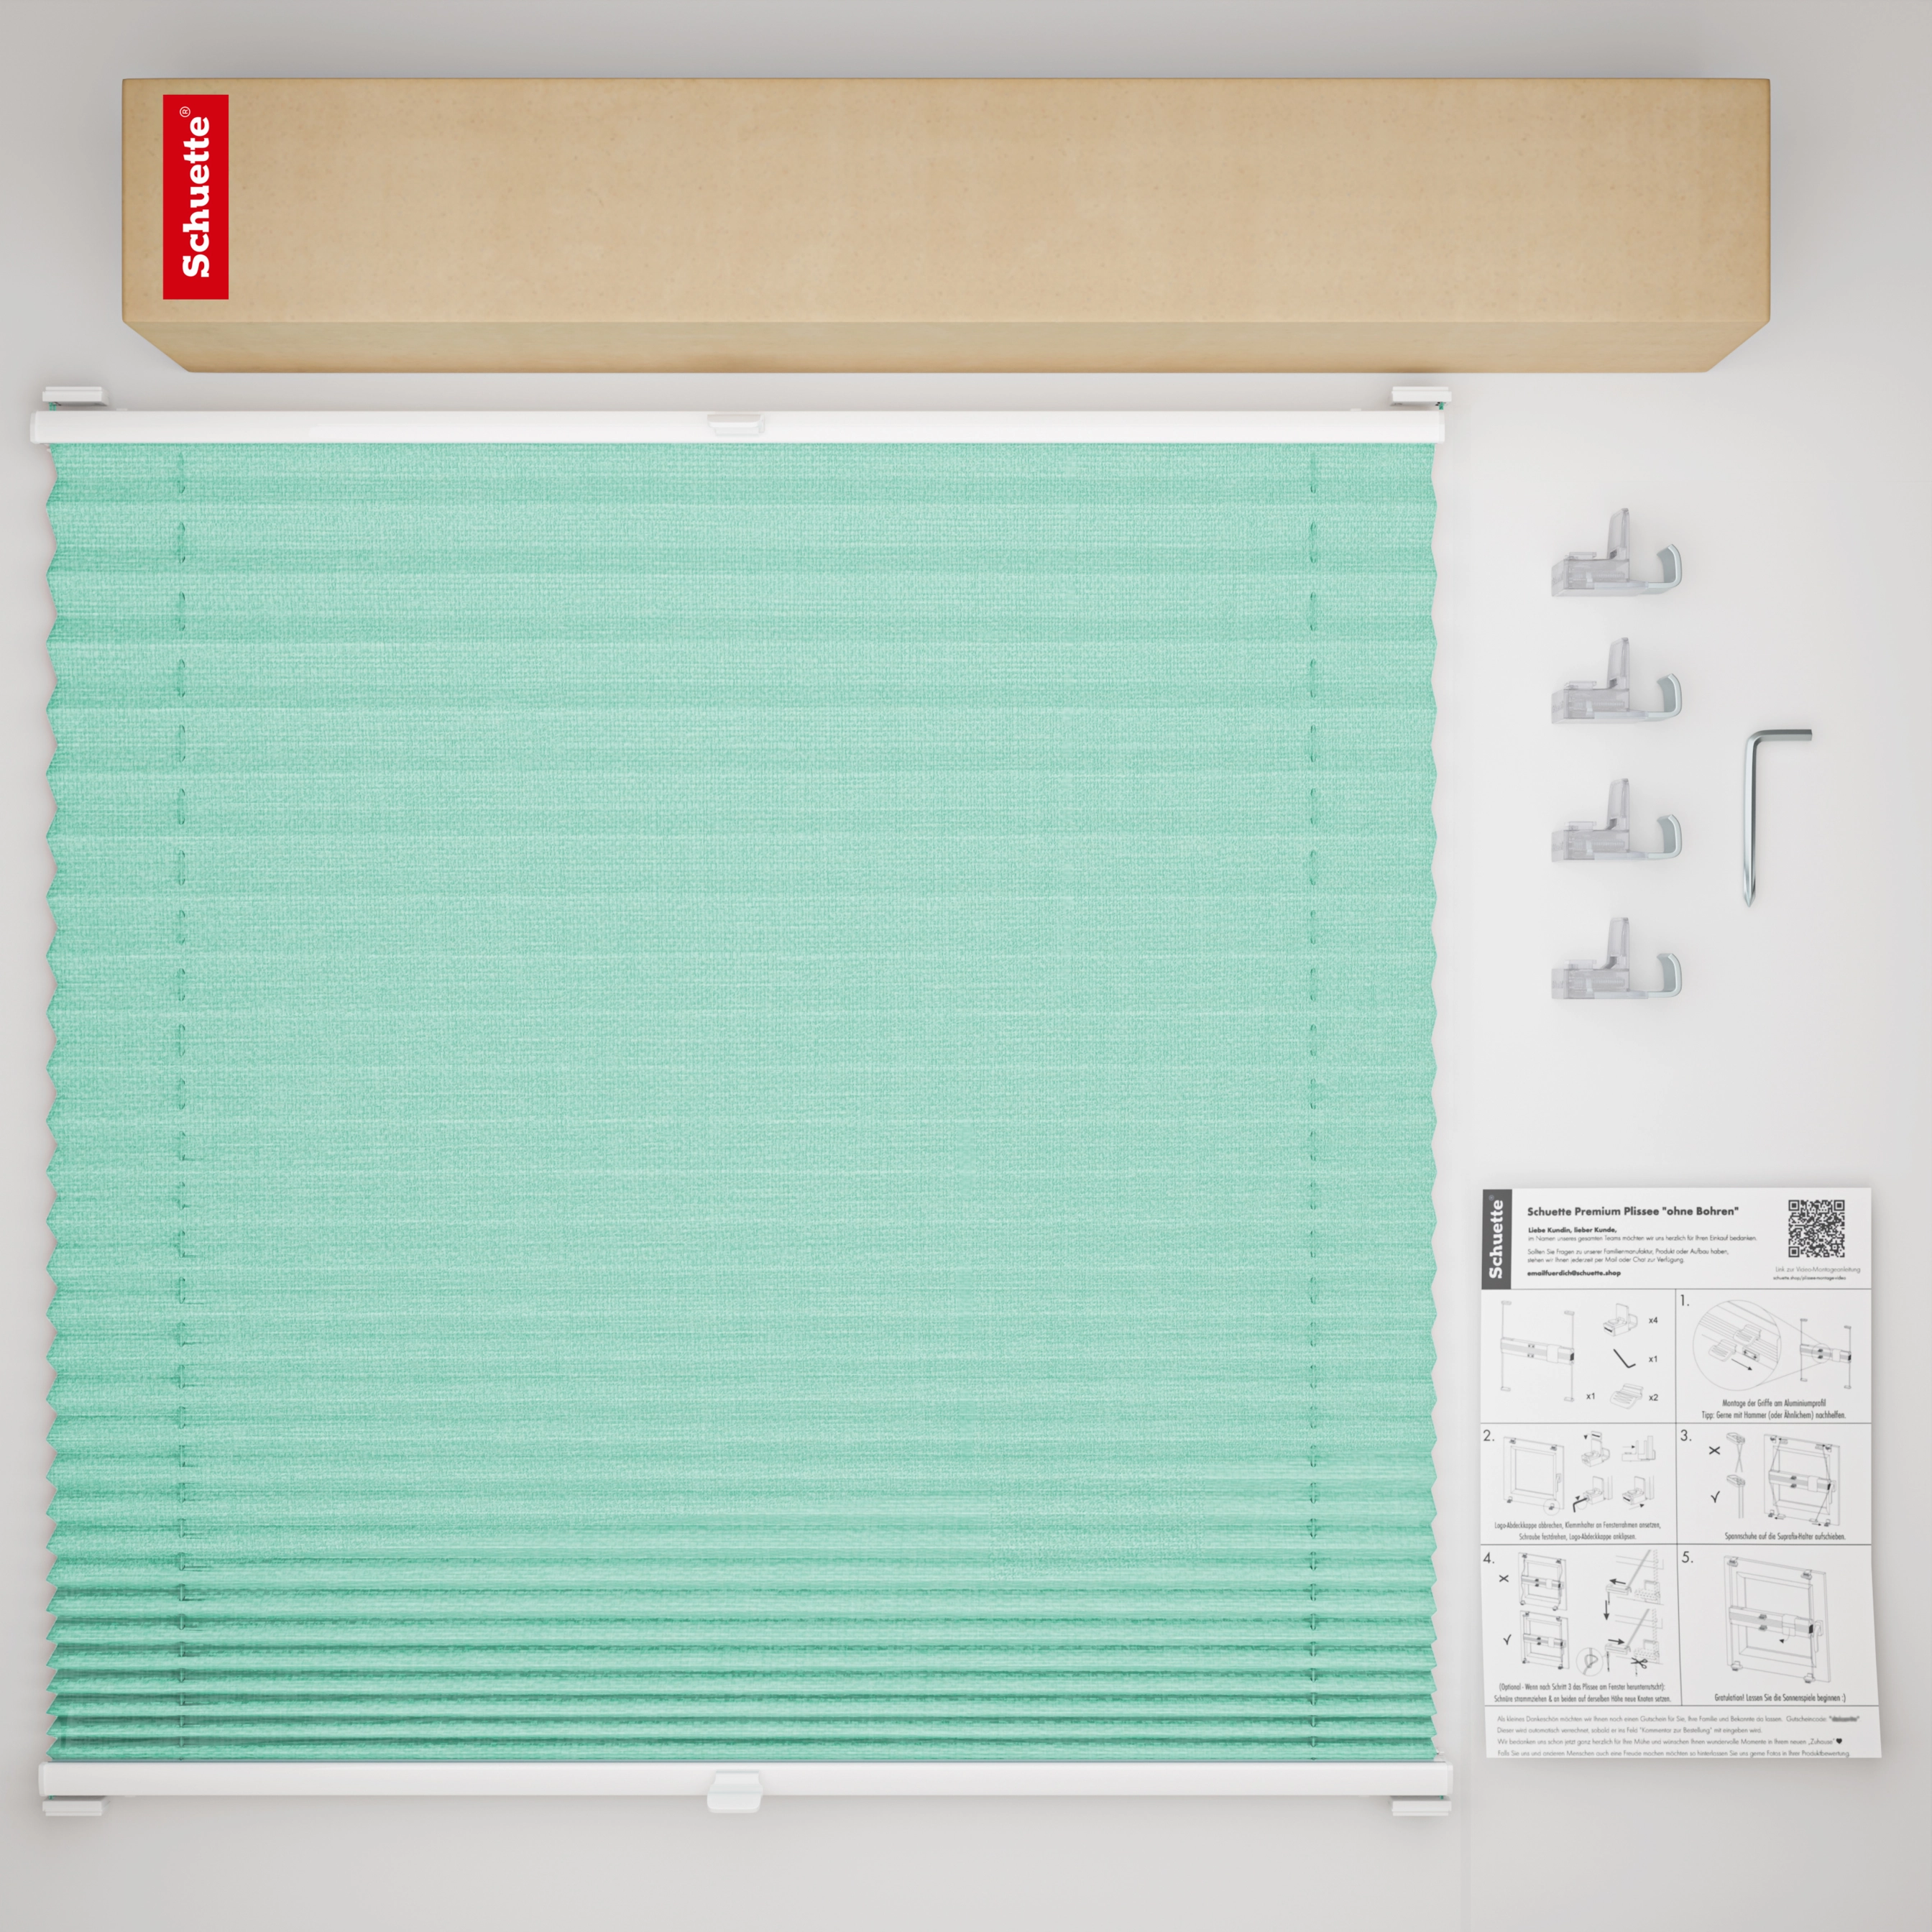 Schuette® Pleated Blind Made to Measure without Drilling • Suprafix Clamp holder “Incognito" Standard” • Melange Collection: Mint Ice Cream (Green) • Profile Colour: White